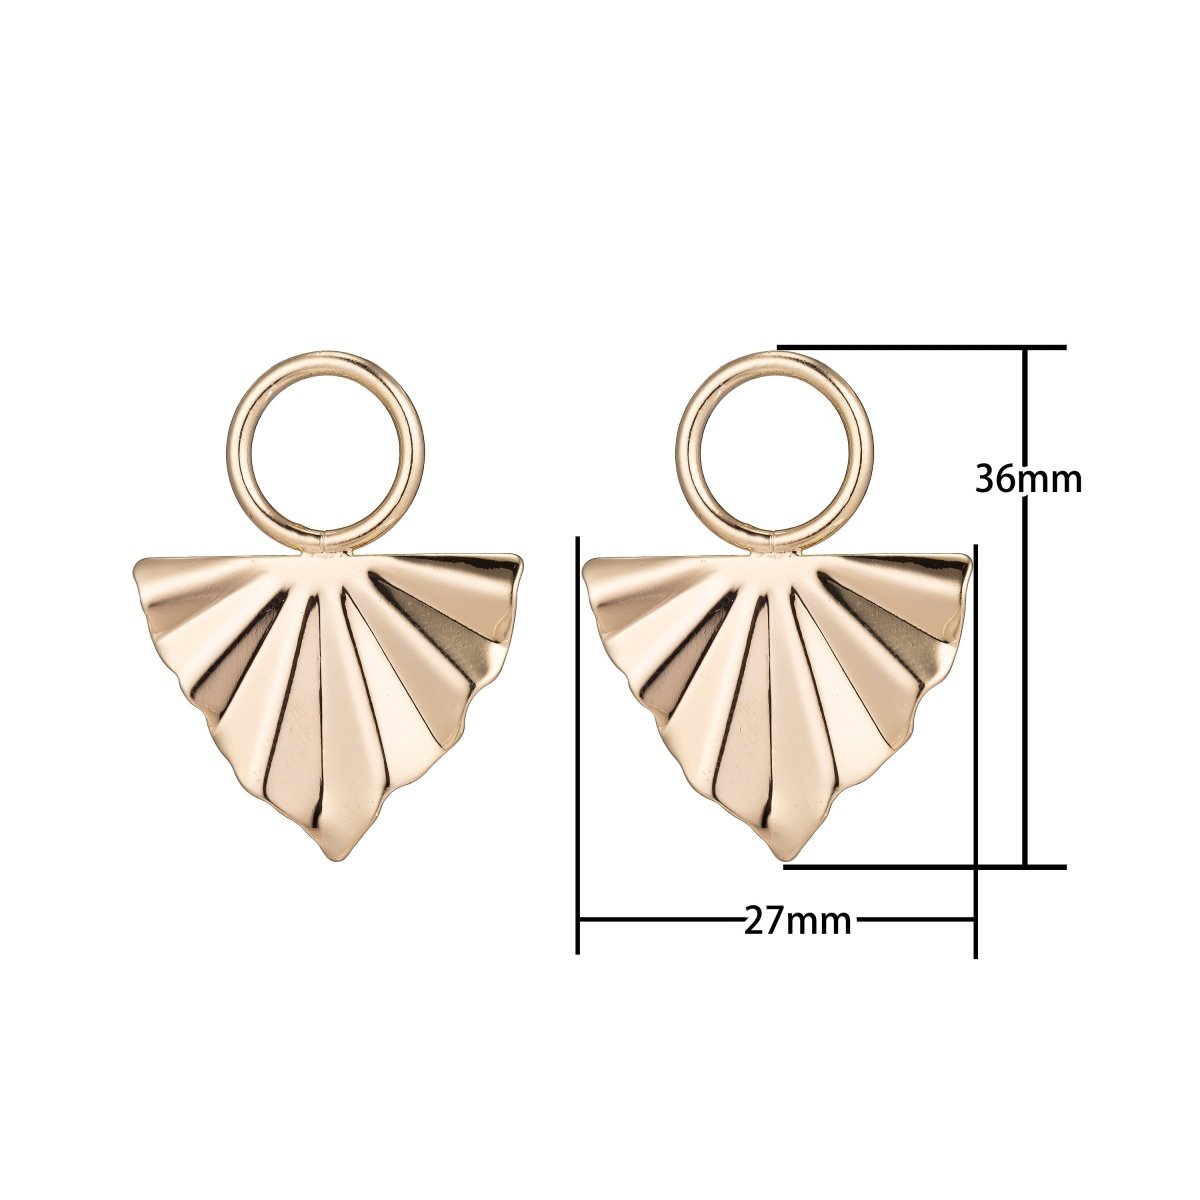 Dainty 18k Gold Filled Earrings Post with Links and Loop, Stud Earrings, Geometric Earring Findings for Jewelry Making Supplies K-009 - DLUXCA